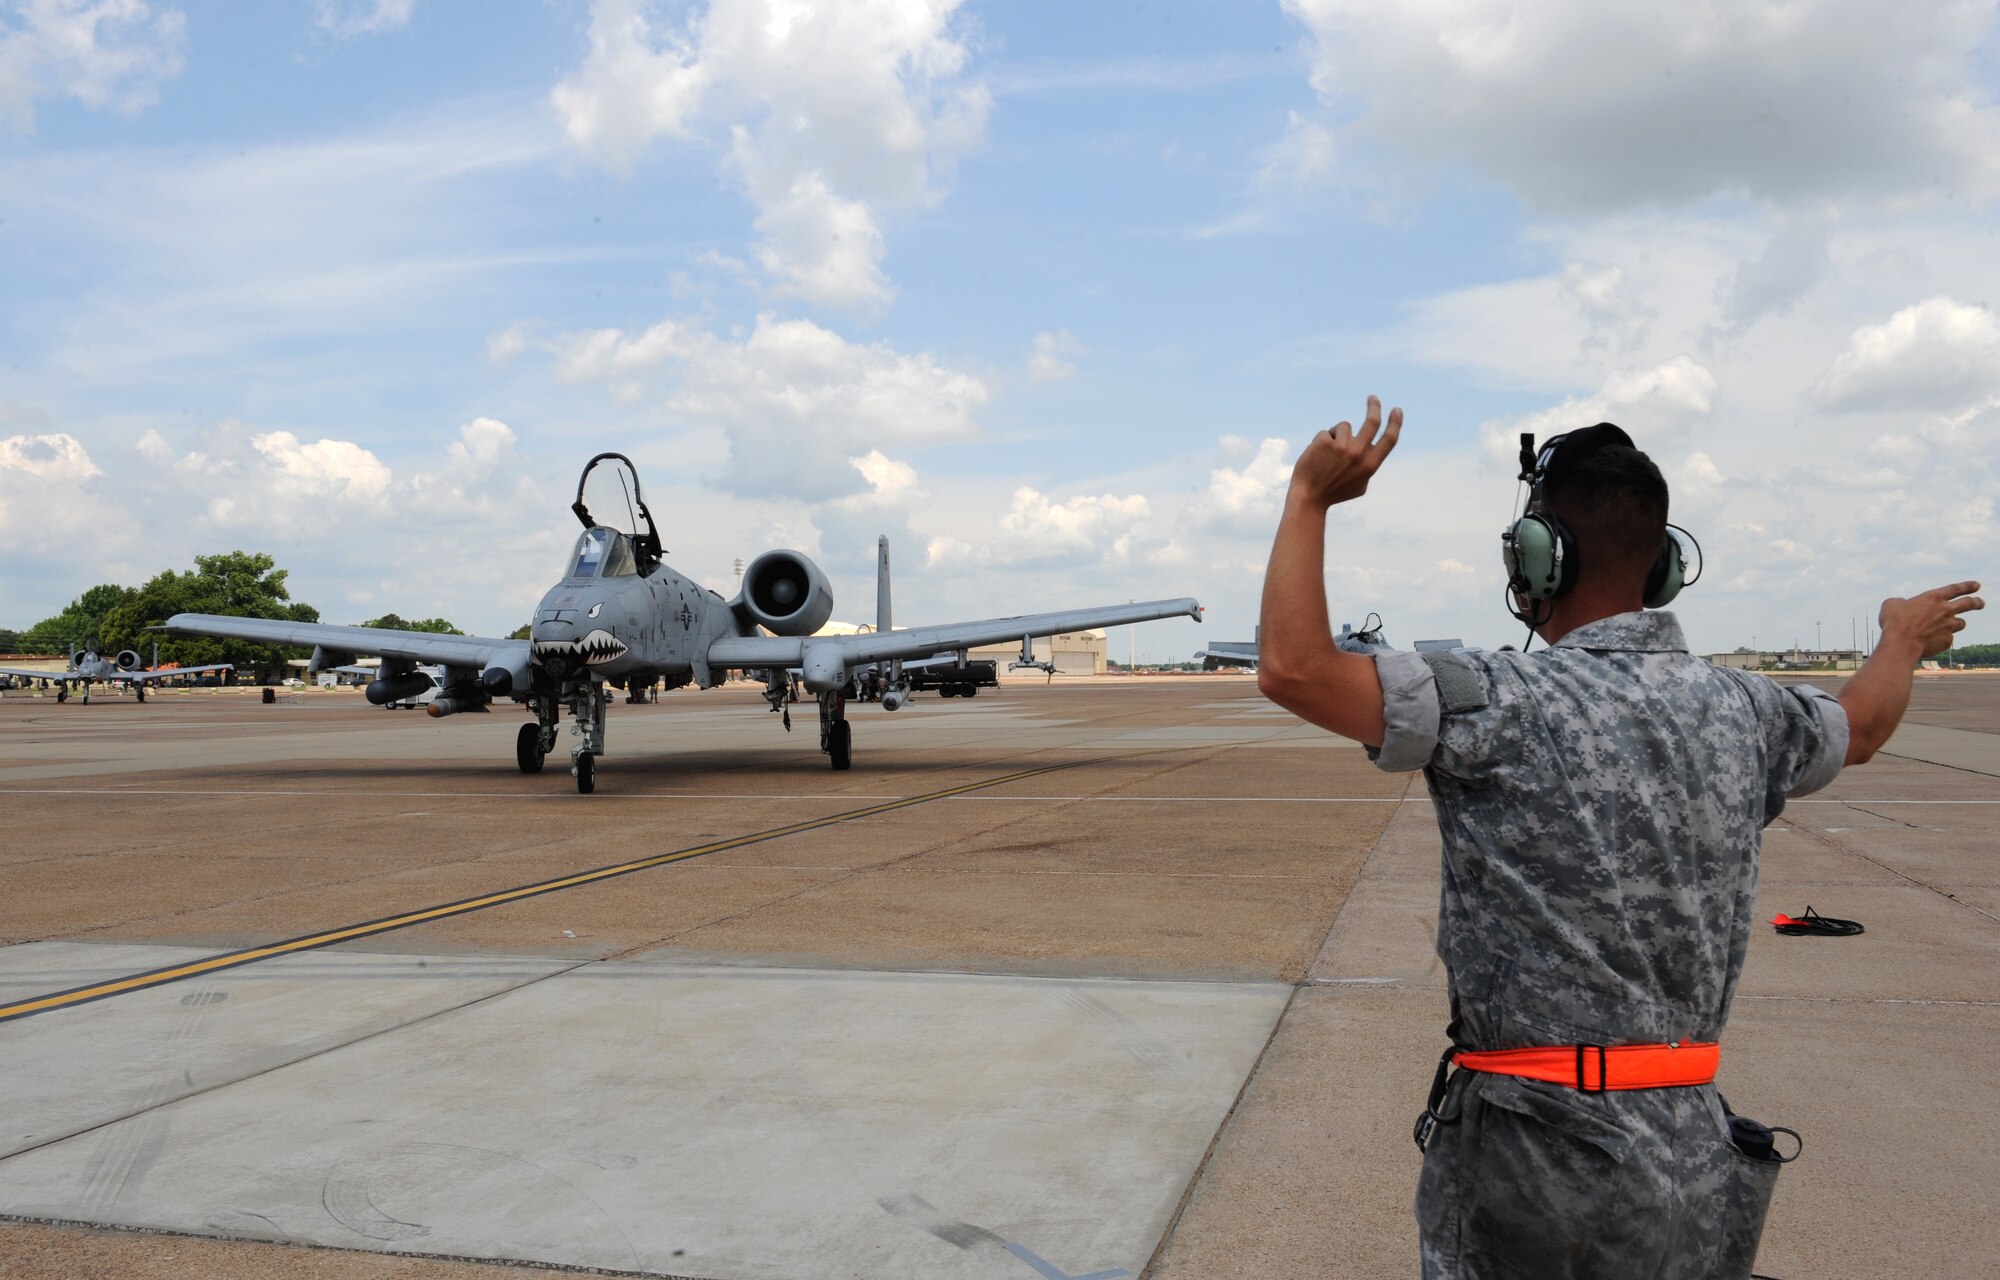 Senior Airman Jason Norris, a crew chief from Moody Air Force Base, Ga., guides an A-10 Thunderbolt II fighter into a parking space on Barksdale Air Force Base, La., June 4, 2013. The A-10 is equipped with one 30 mm GAU-8/A seven-barrel Gatling Gun capable of firing 3,900 rounds per minute to defeat a wide variety of targets including tanks. (U.S. Air Force photo/Airman 1st Class Benjamin Gonsier)
